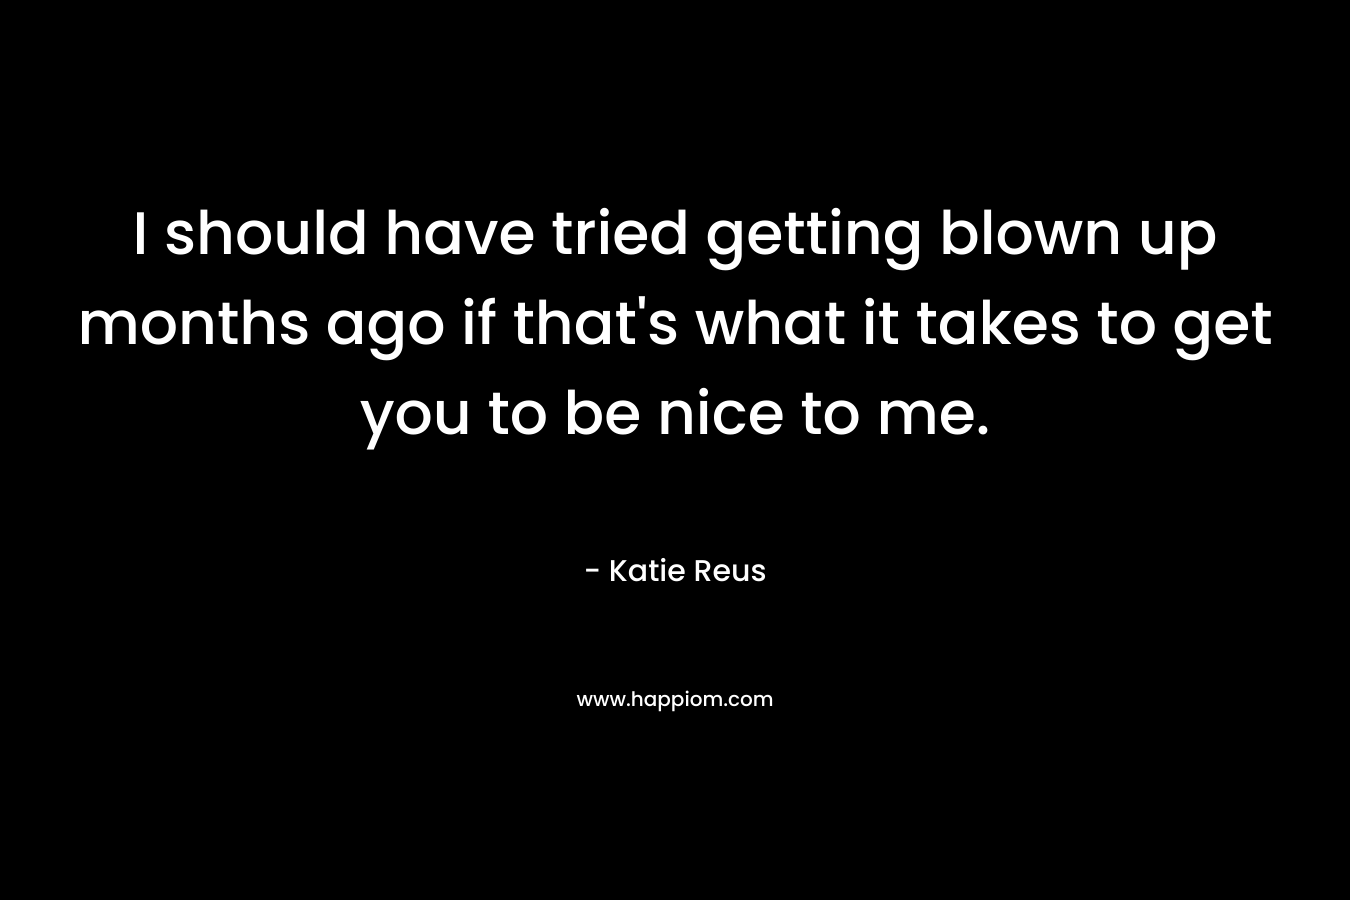 I should have tried getting blown up months ago if that’s what it takes to get you to be nice to me. – Katie Reus